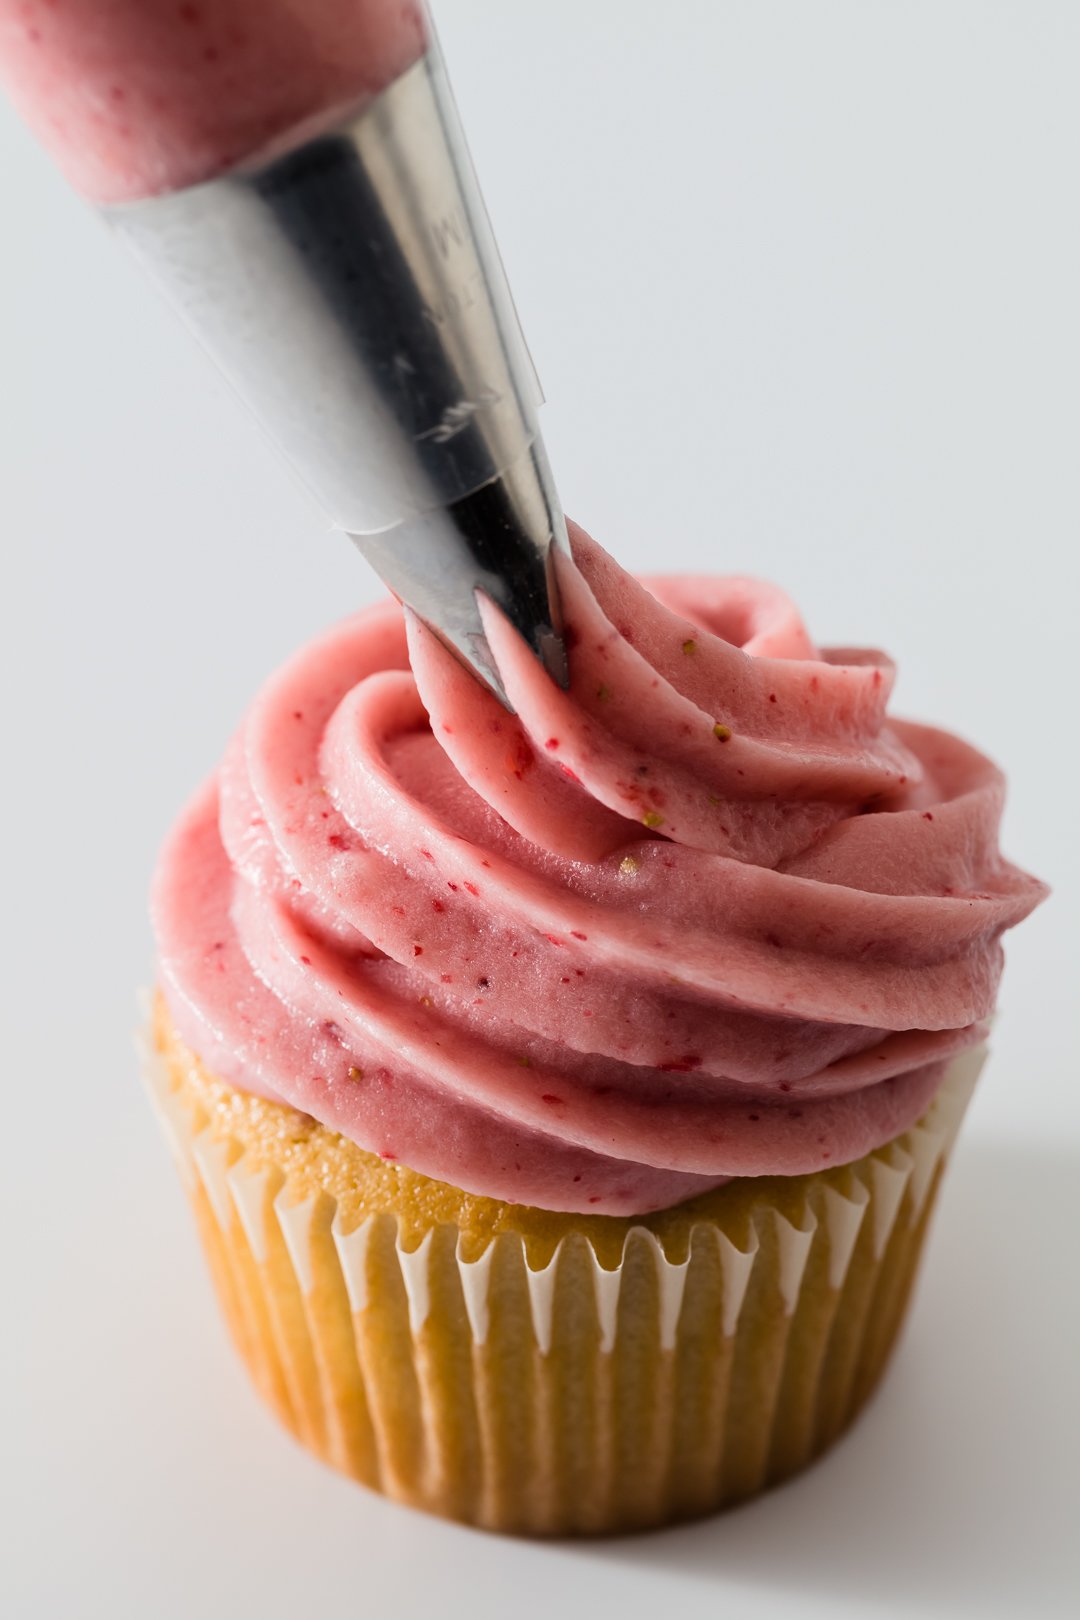 Strawberry Cupcakes frosted with Strawberry Cream Cheese Frosting